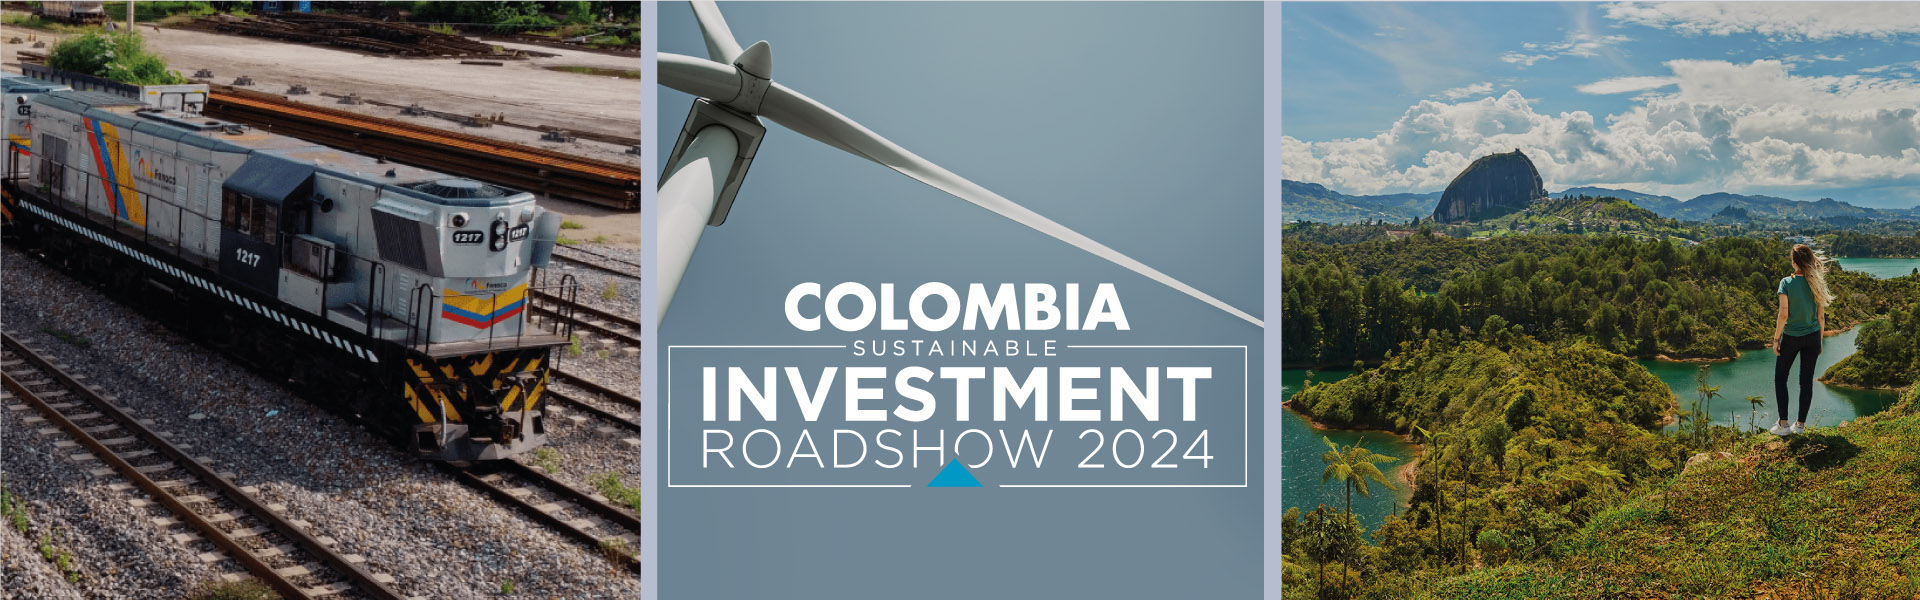 COLOMBIA SUSTAINABLE INVESTMENT ROADSHOW